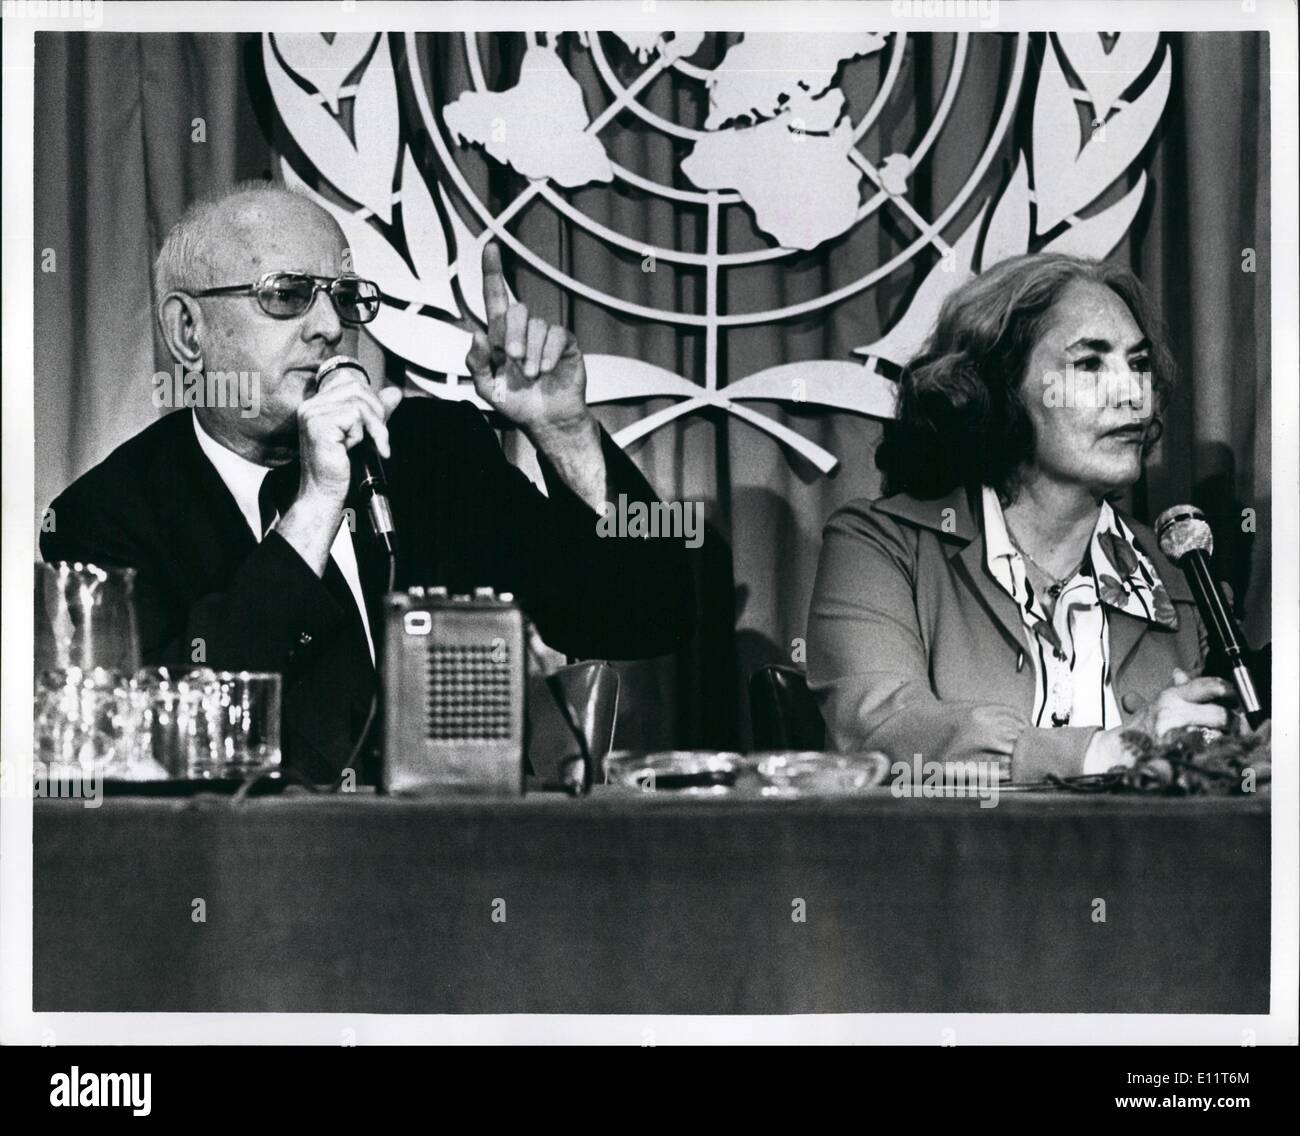 Nov. 11, 1979 - Press Conference at the UN with Oscar Collazo and Lolita Lebron Puertorican Nationalists participating. They were among the four terrorists who wanted to kill Pres. Truman, were in jail for 25 years and now pardoned by Pres. Carter. Stock Photo